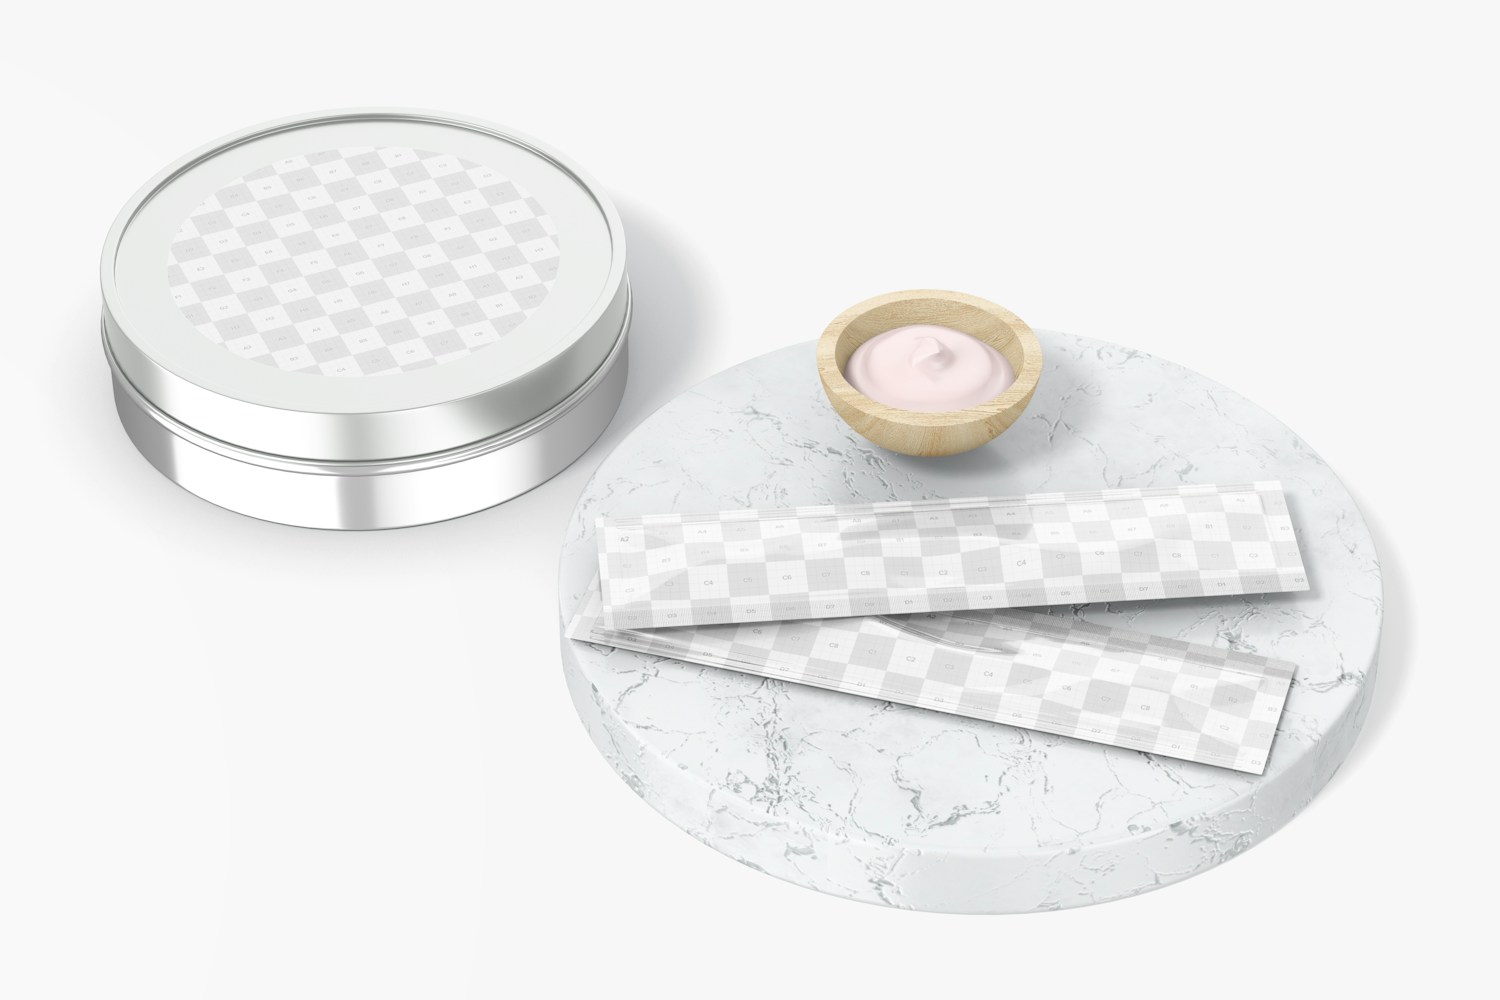 Small Clinical Face Products Scene Mockup, on Surface